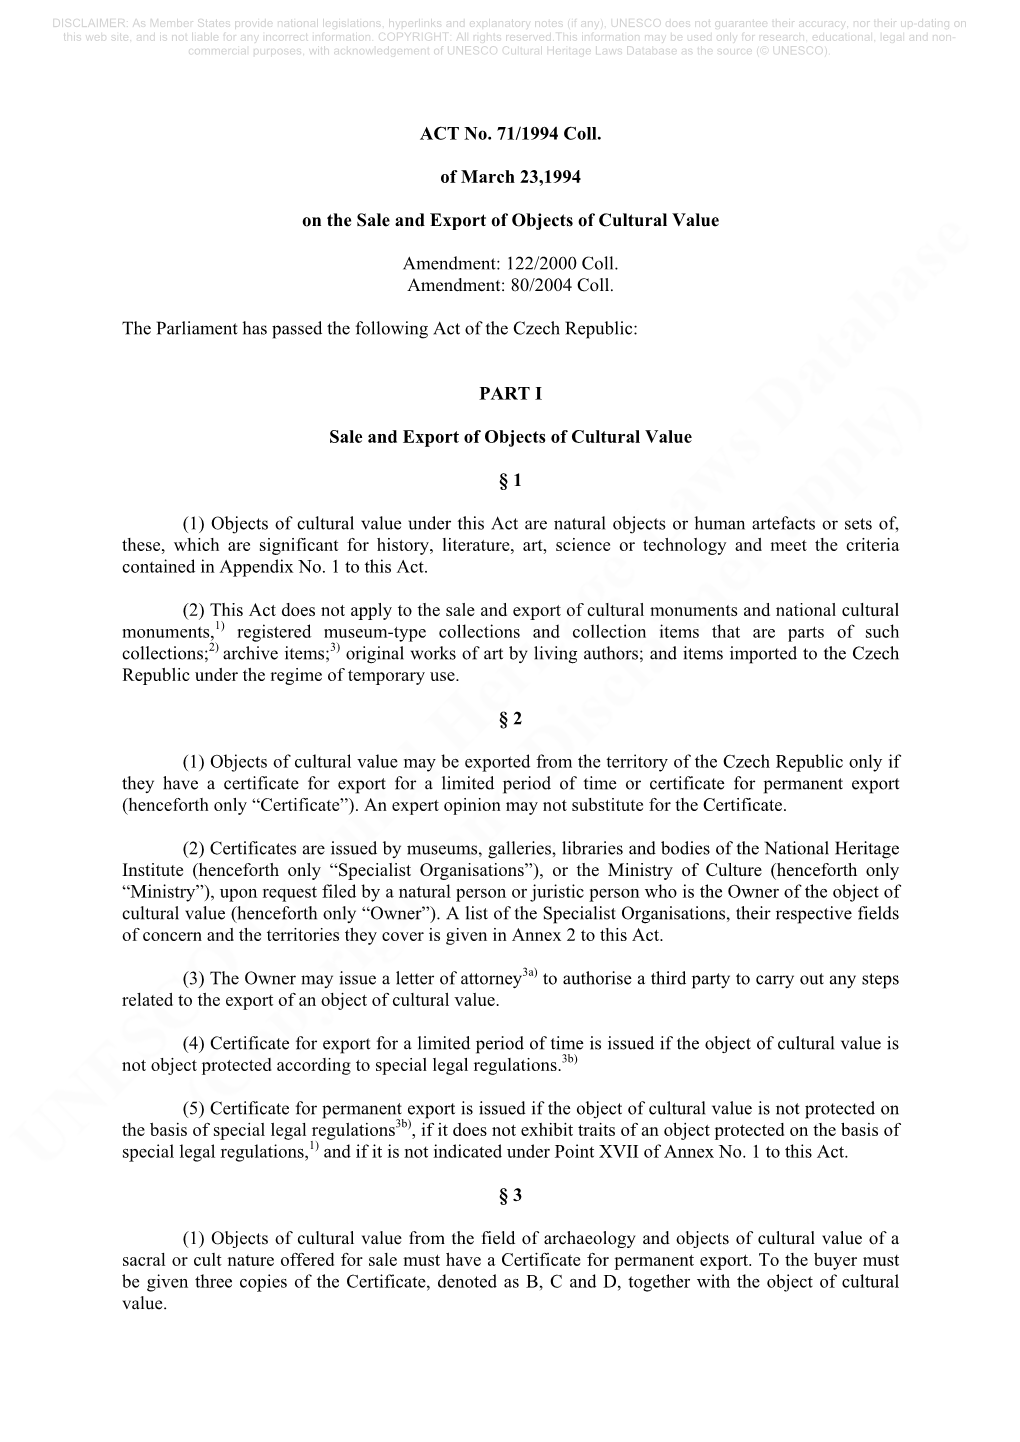 ACT No. 71/1994 Coll. of March 23,1994 on the Sale and Export Of